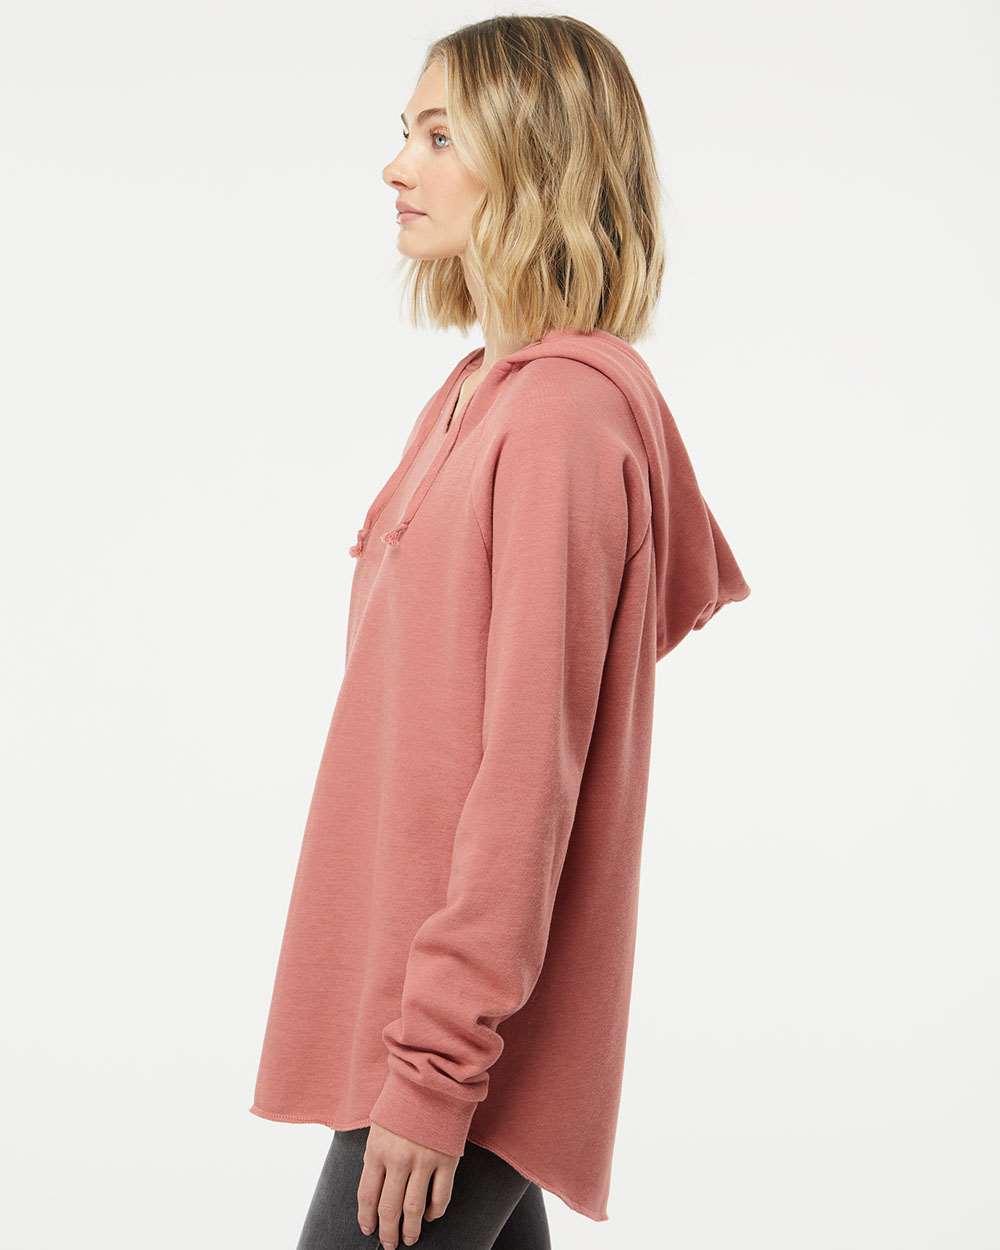 Independent Trading Co. Women’s Lightweight California Wave Wash Hooded Sweatshirt PRM2500 #colormdl_Dusty Rose